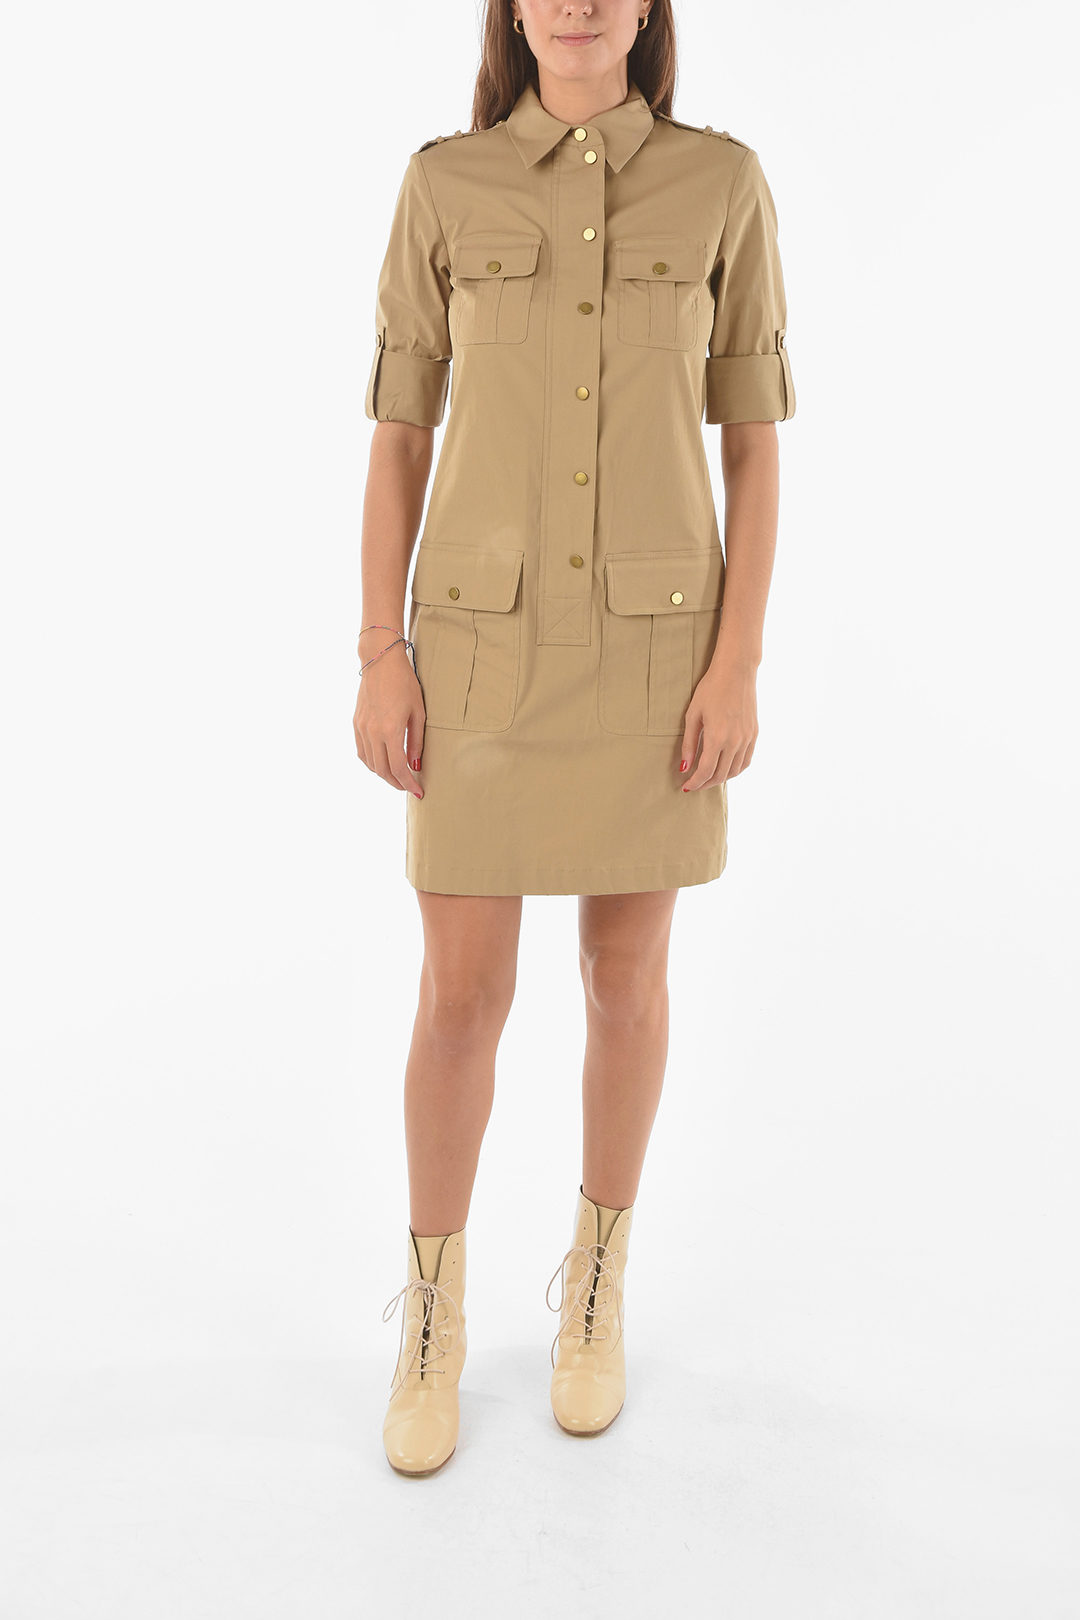 Michael Michael Kors Beige Belted SnakePrint Shirt Dress  Megan Thee  Stallions Style Is Just as Savage as Youd Expect  Shop Her Looks   POPSUGAR Fashion Photo 28